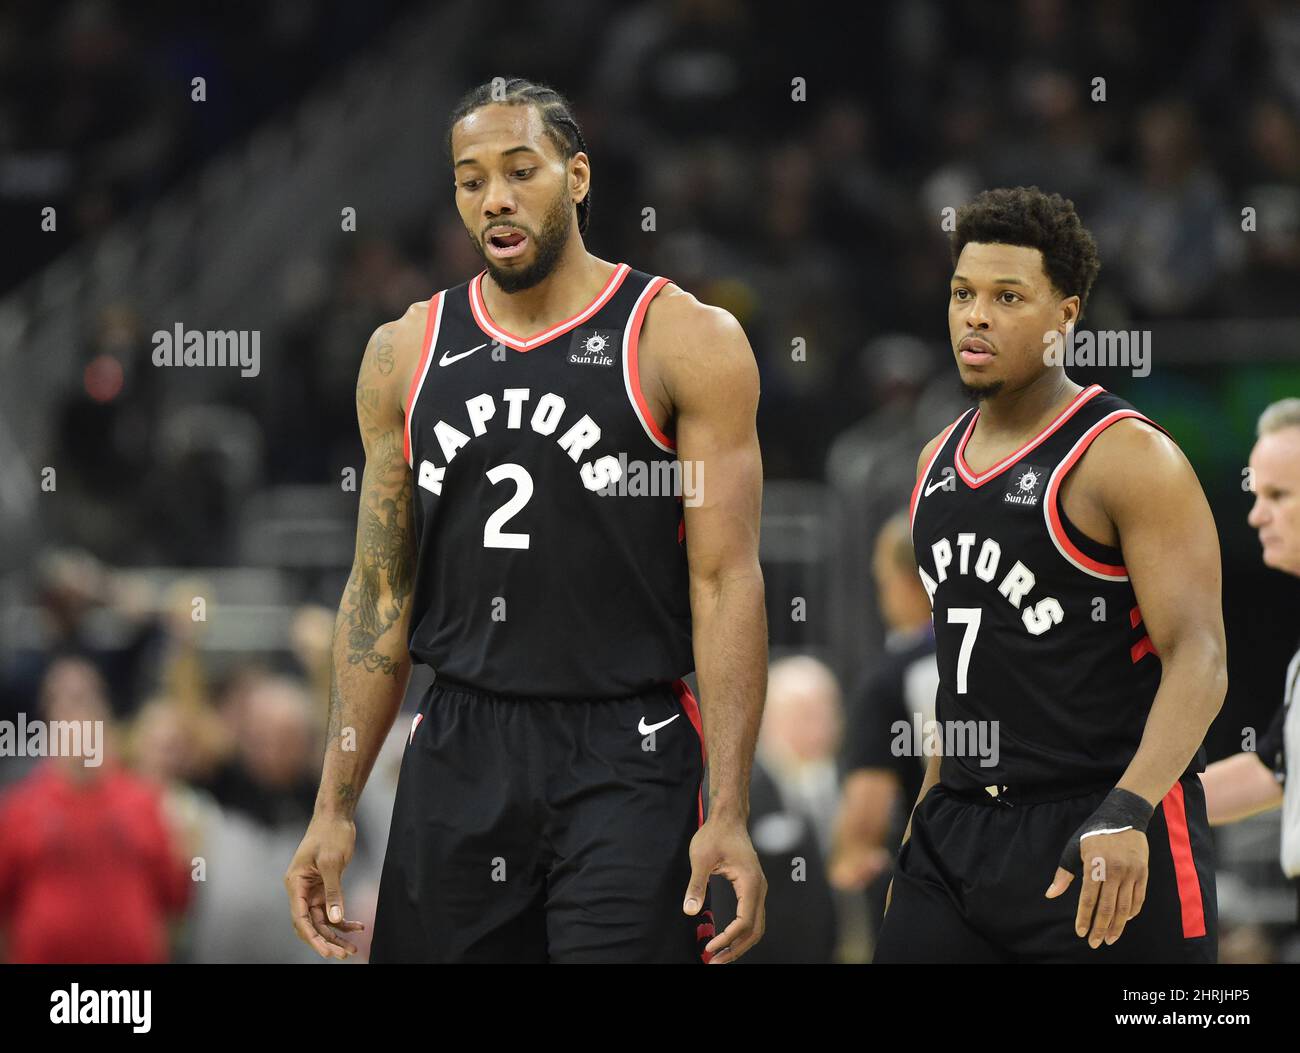 Toronto Raptors forward Kawhi Leonard (2) and Toronto Raptors guard Kyle Lowry (7) react during a break in play first half Game 2 of the NBA basketball Eastern Conference finals against the Milwaukee Bucks in Milwaukee on Friday, May 17, 2019. THE CANADIAN PRESS/Frank Gunn Stock Photo